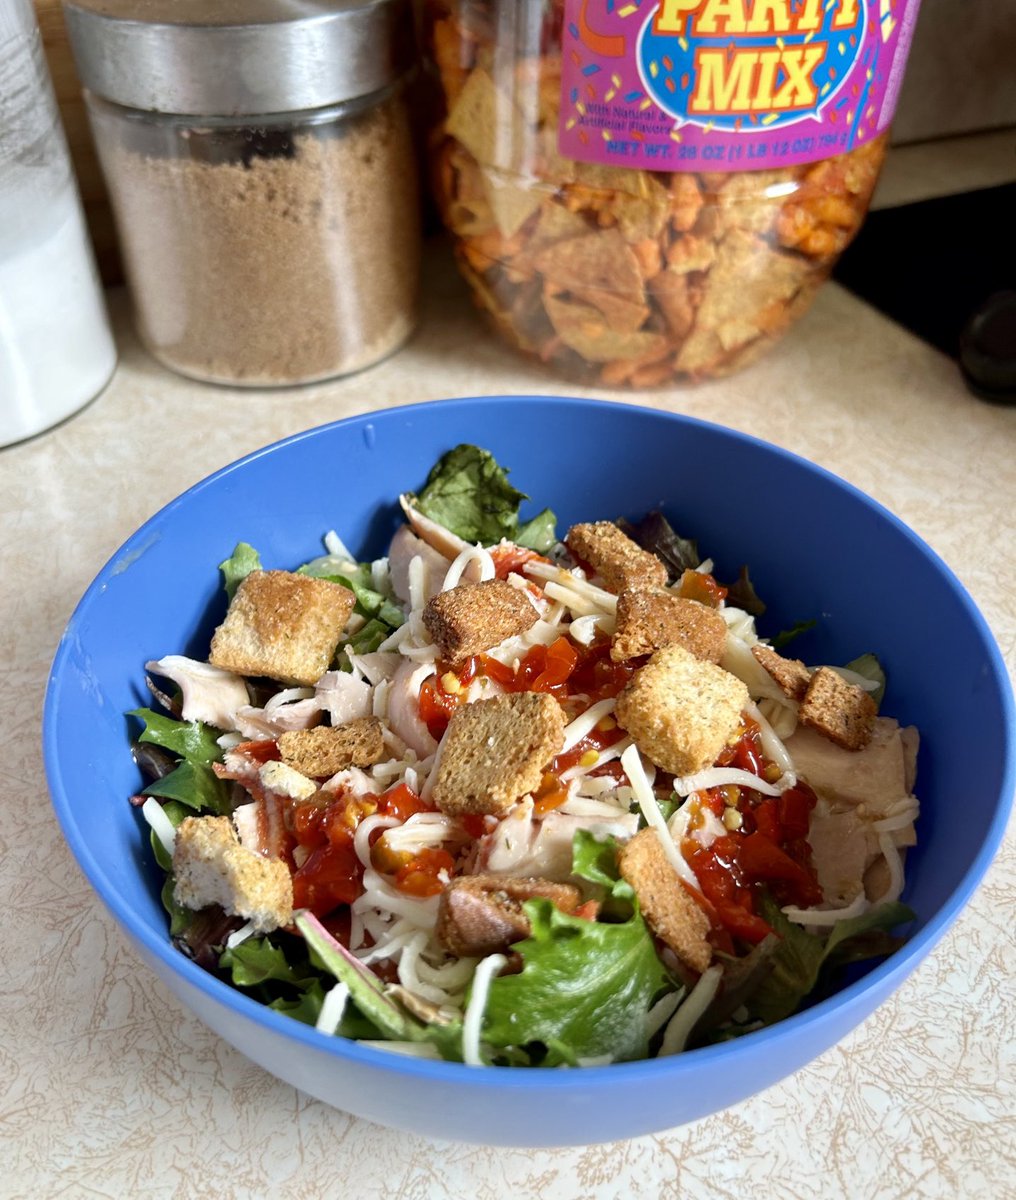 Modified hoagie salad.  Turkey, pepperoni, muhtz, shaved red onion, Italian vinaigrette, hot pepper relish and croutons on a bed of assorted greens.  Good living right here!